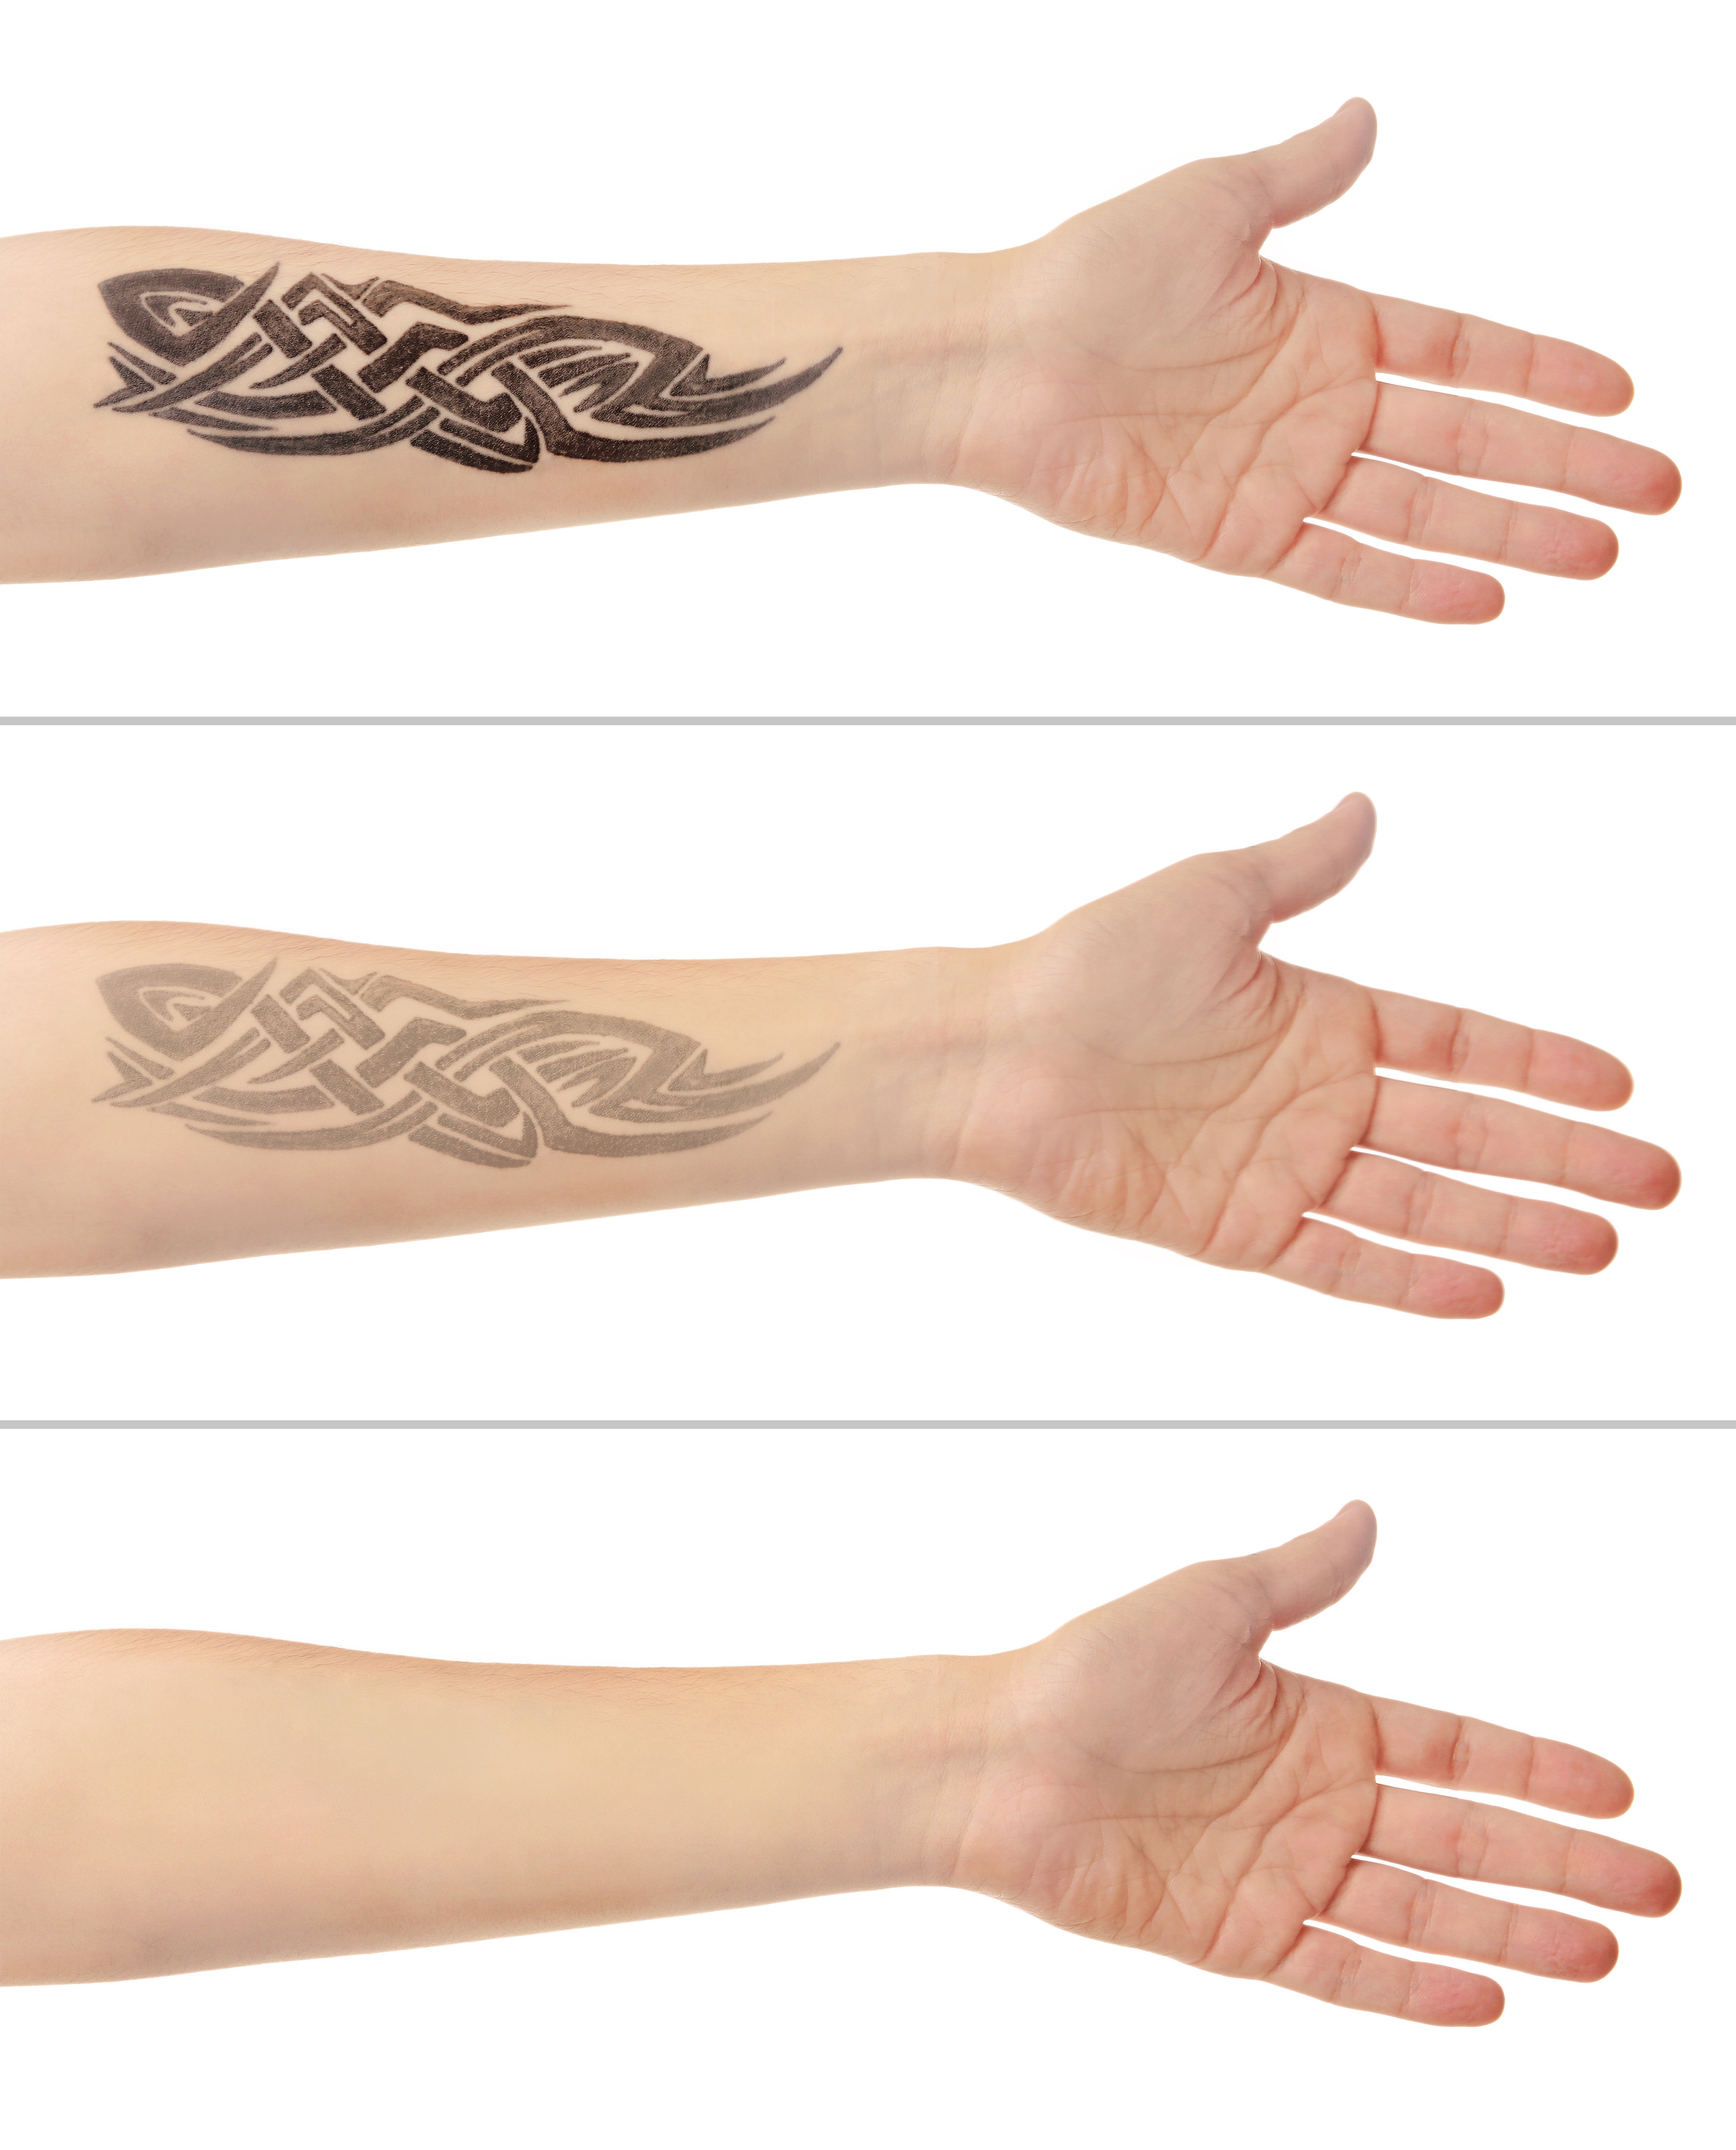 How Much Does Laser Tattoo Removal Cost? - Laser Spa In NYC